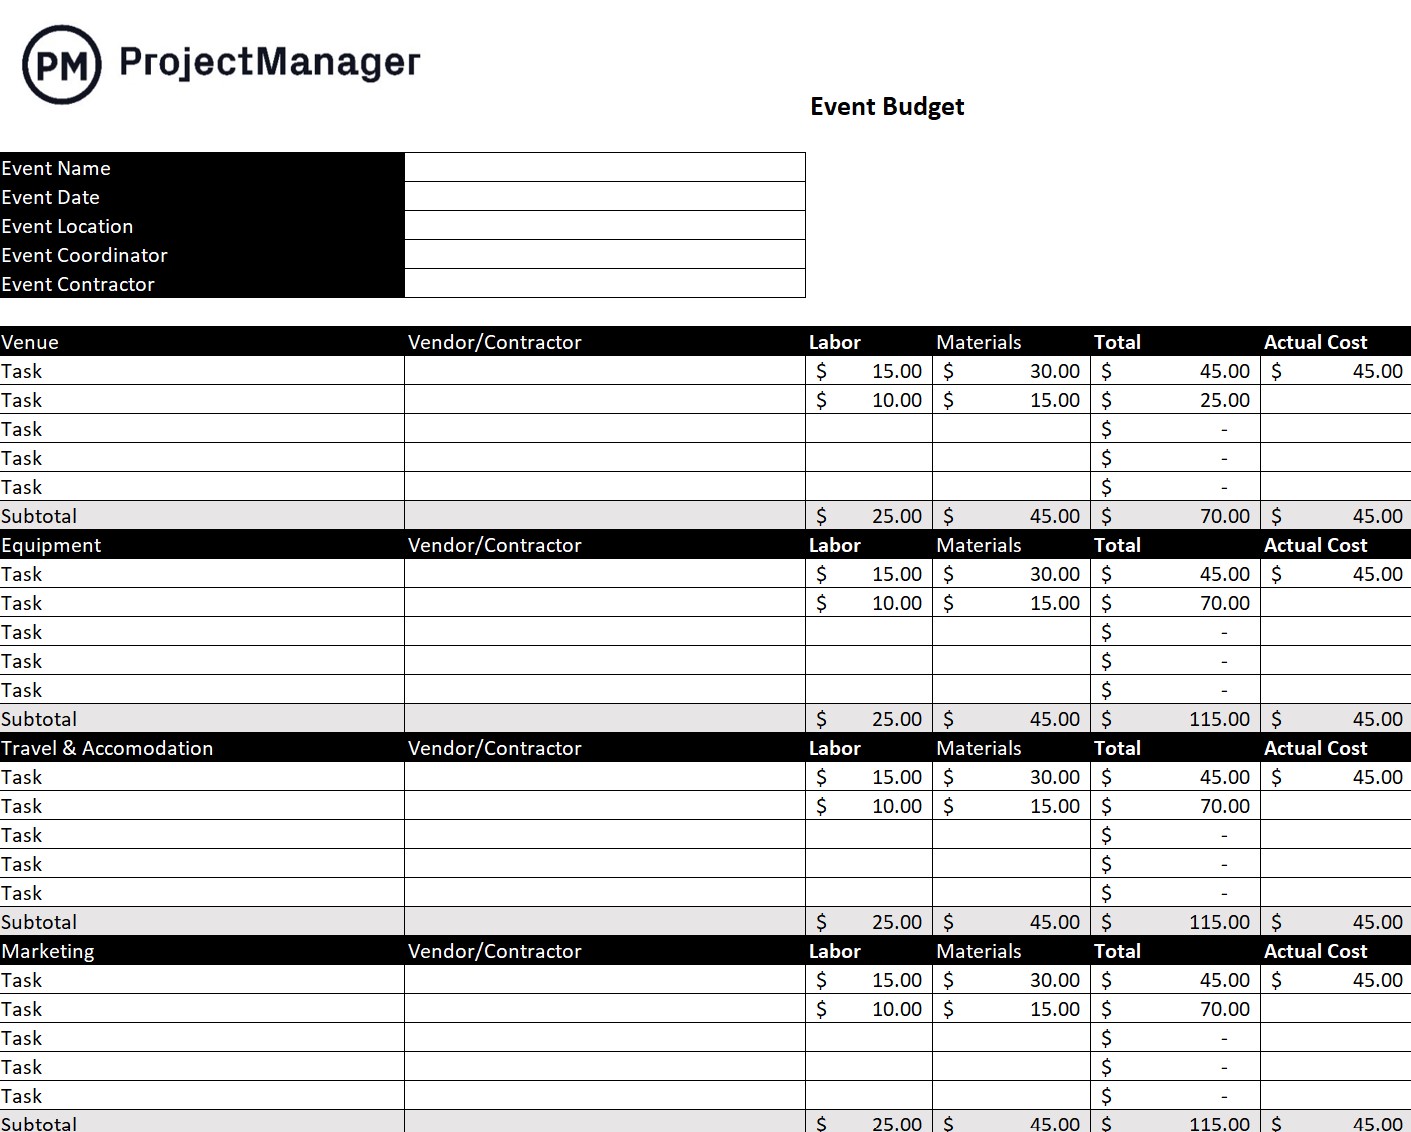 ProjectManager's event budget template